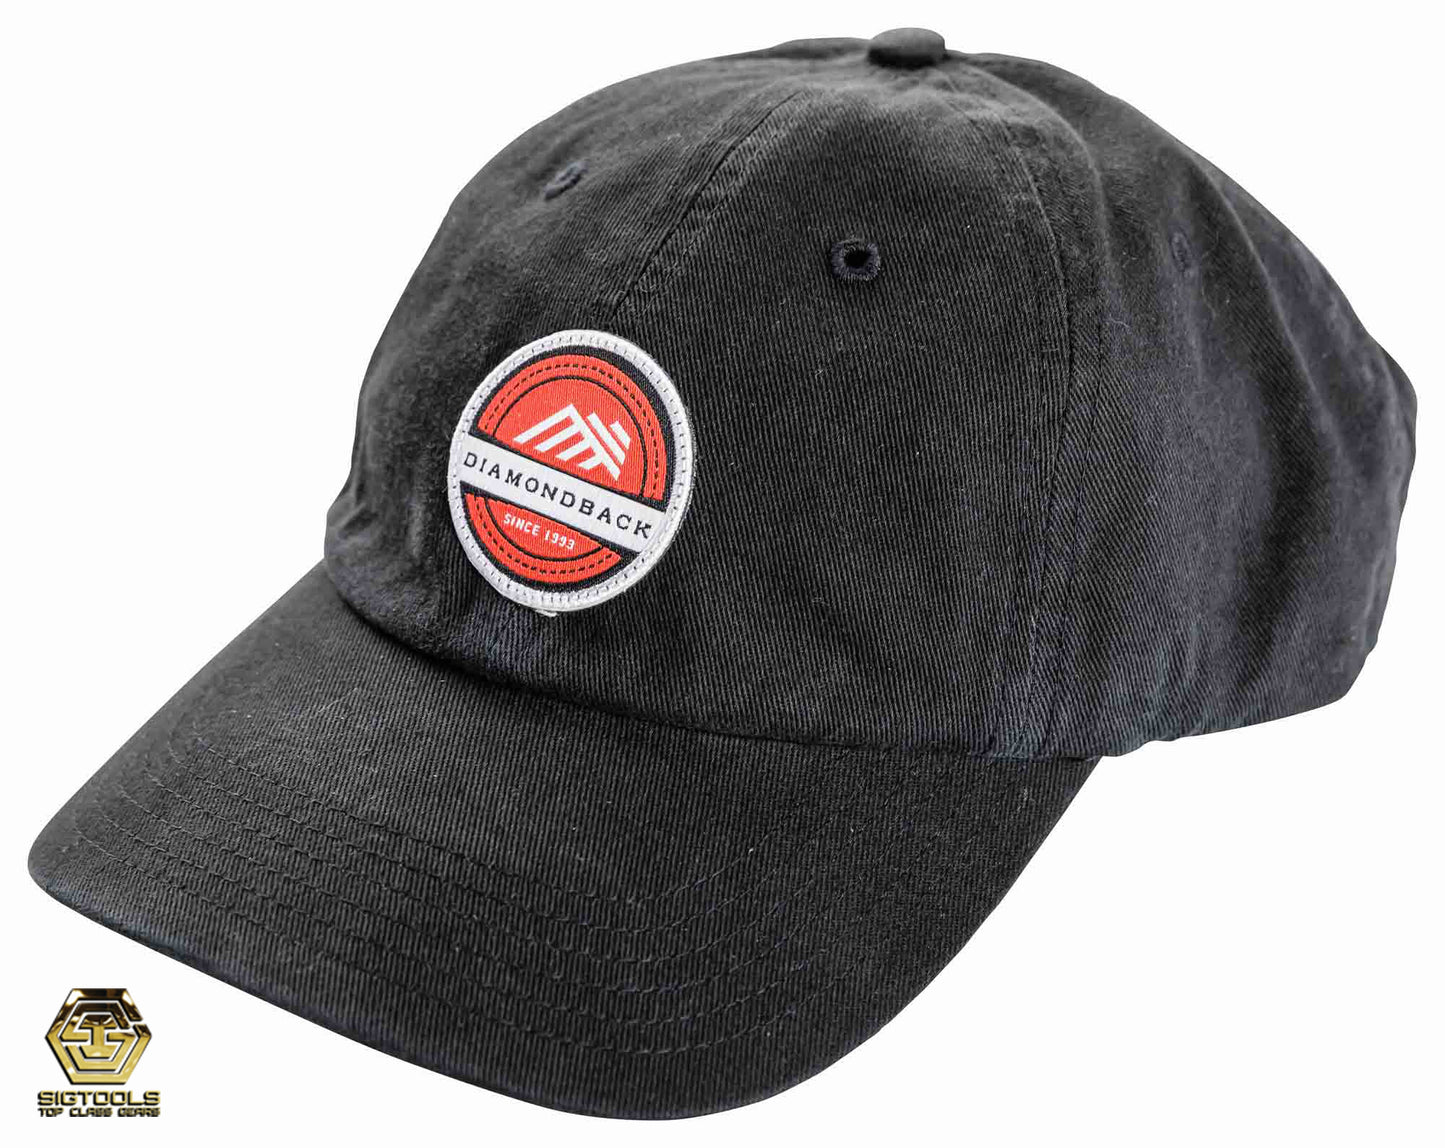  A front view of a Diamondback dad hat with a red logo, a stylish accessory for fans of the brand.